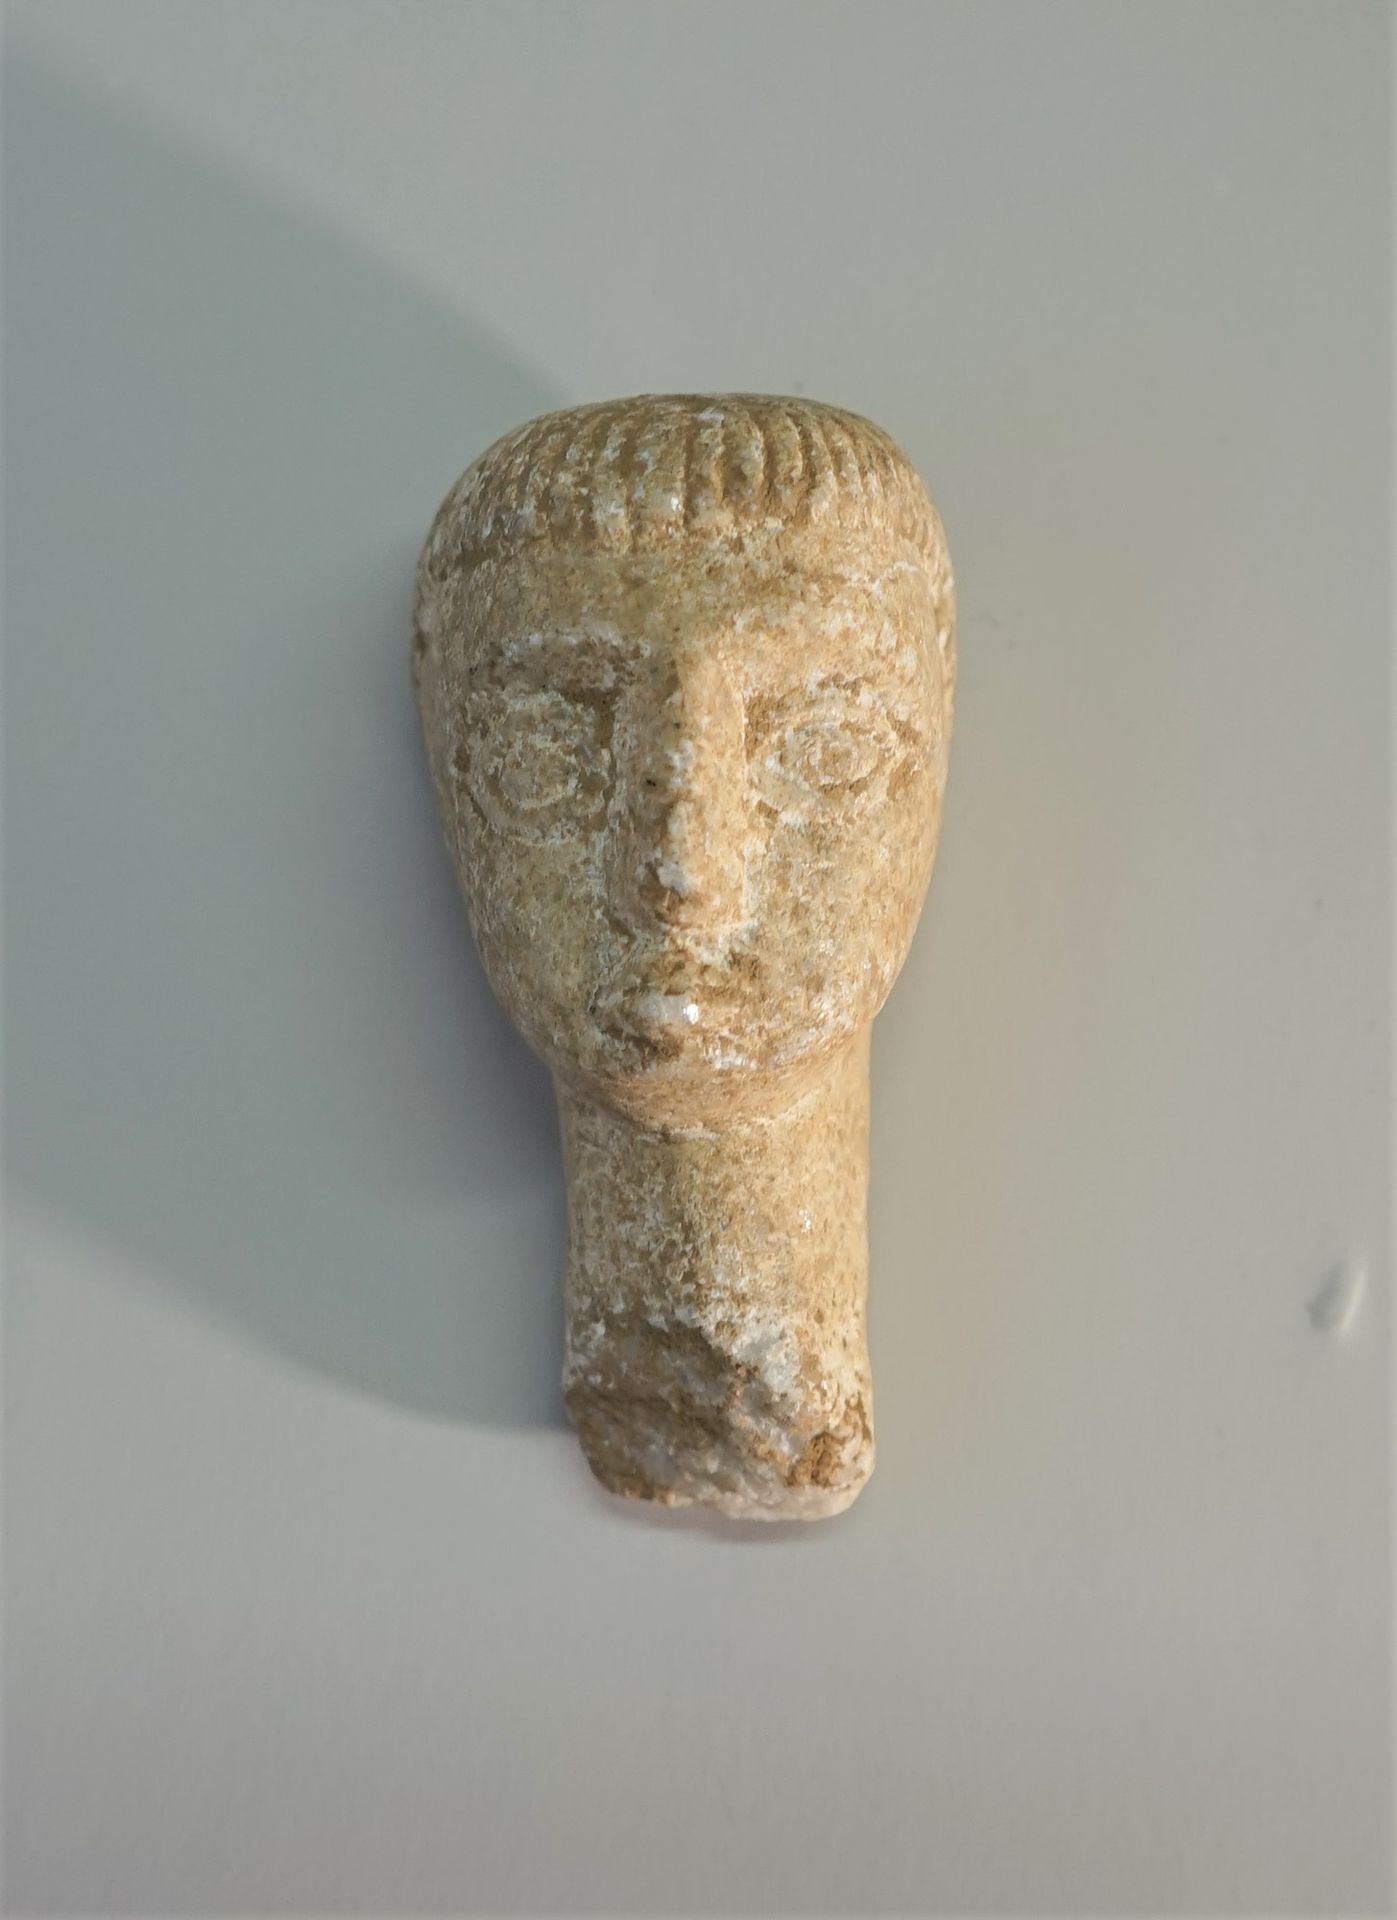 Null Celtic style white stone (marble) head

9cm